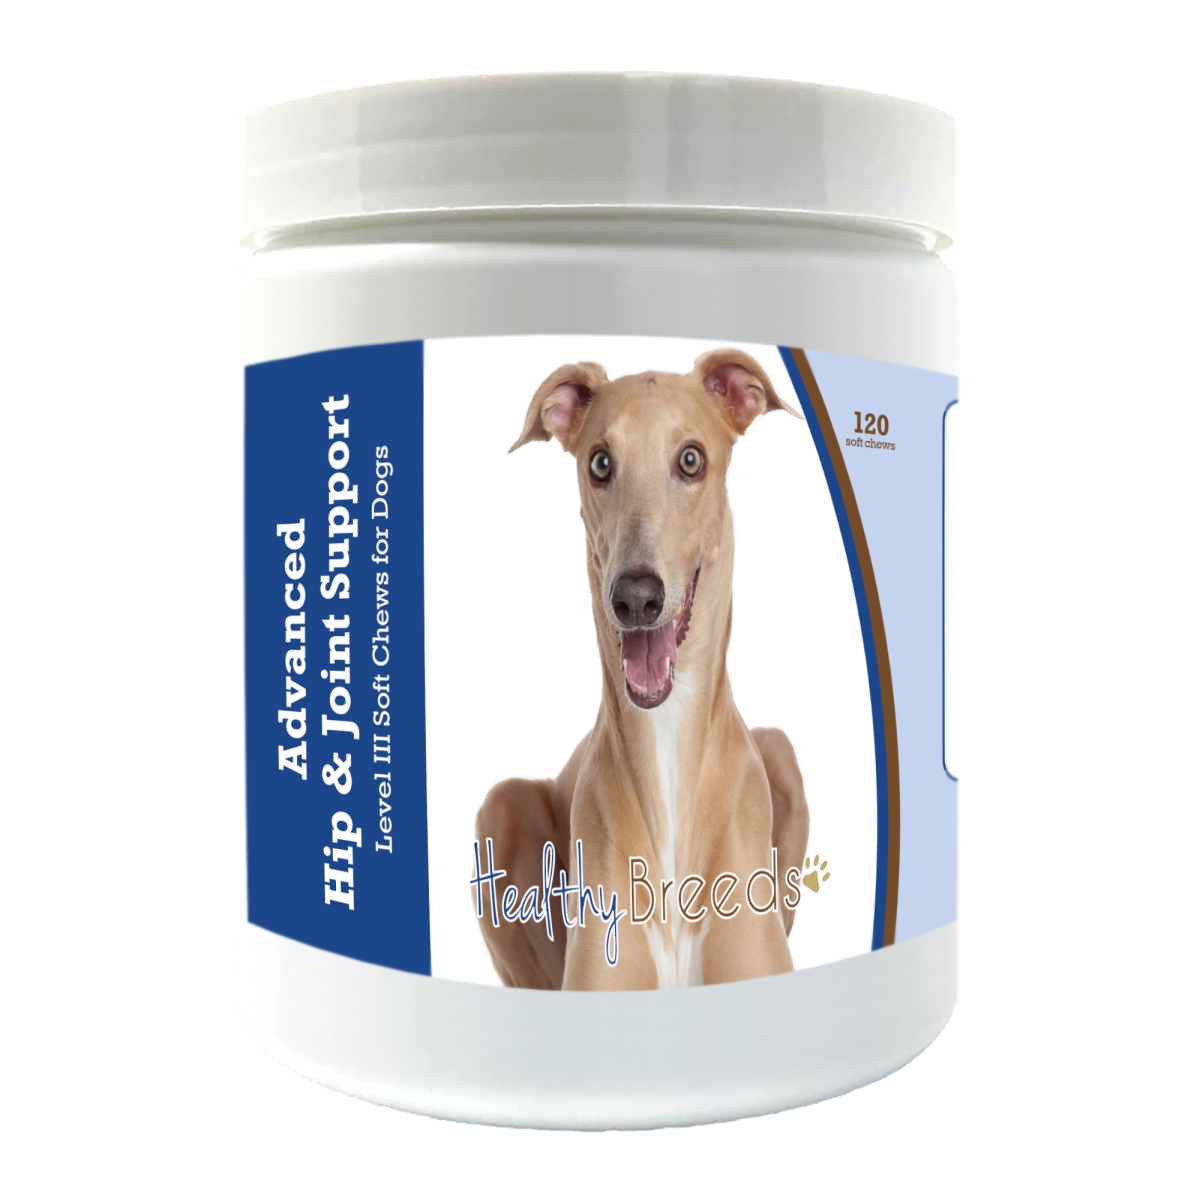 Picture of Healthy Breeds 192959898439 Italian Greyhound Advanced Hip & Joint Support Level III Soft Chews for Dogs